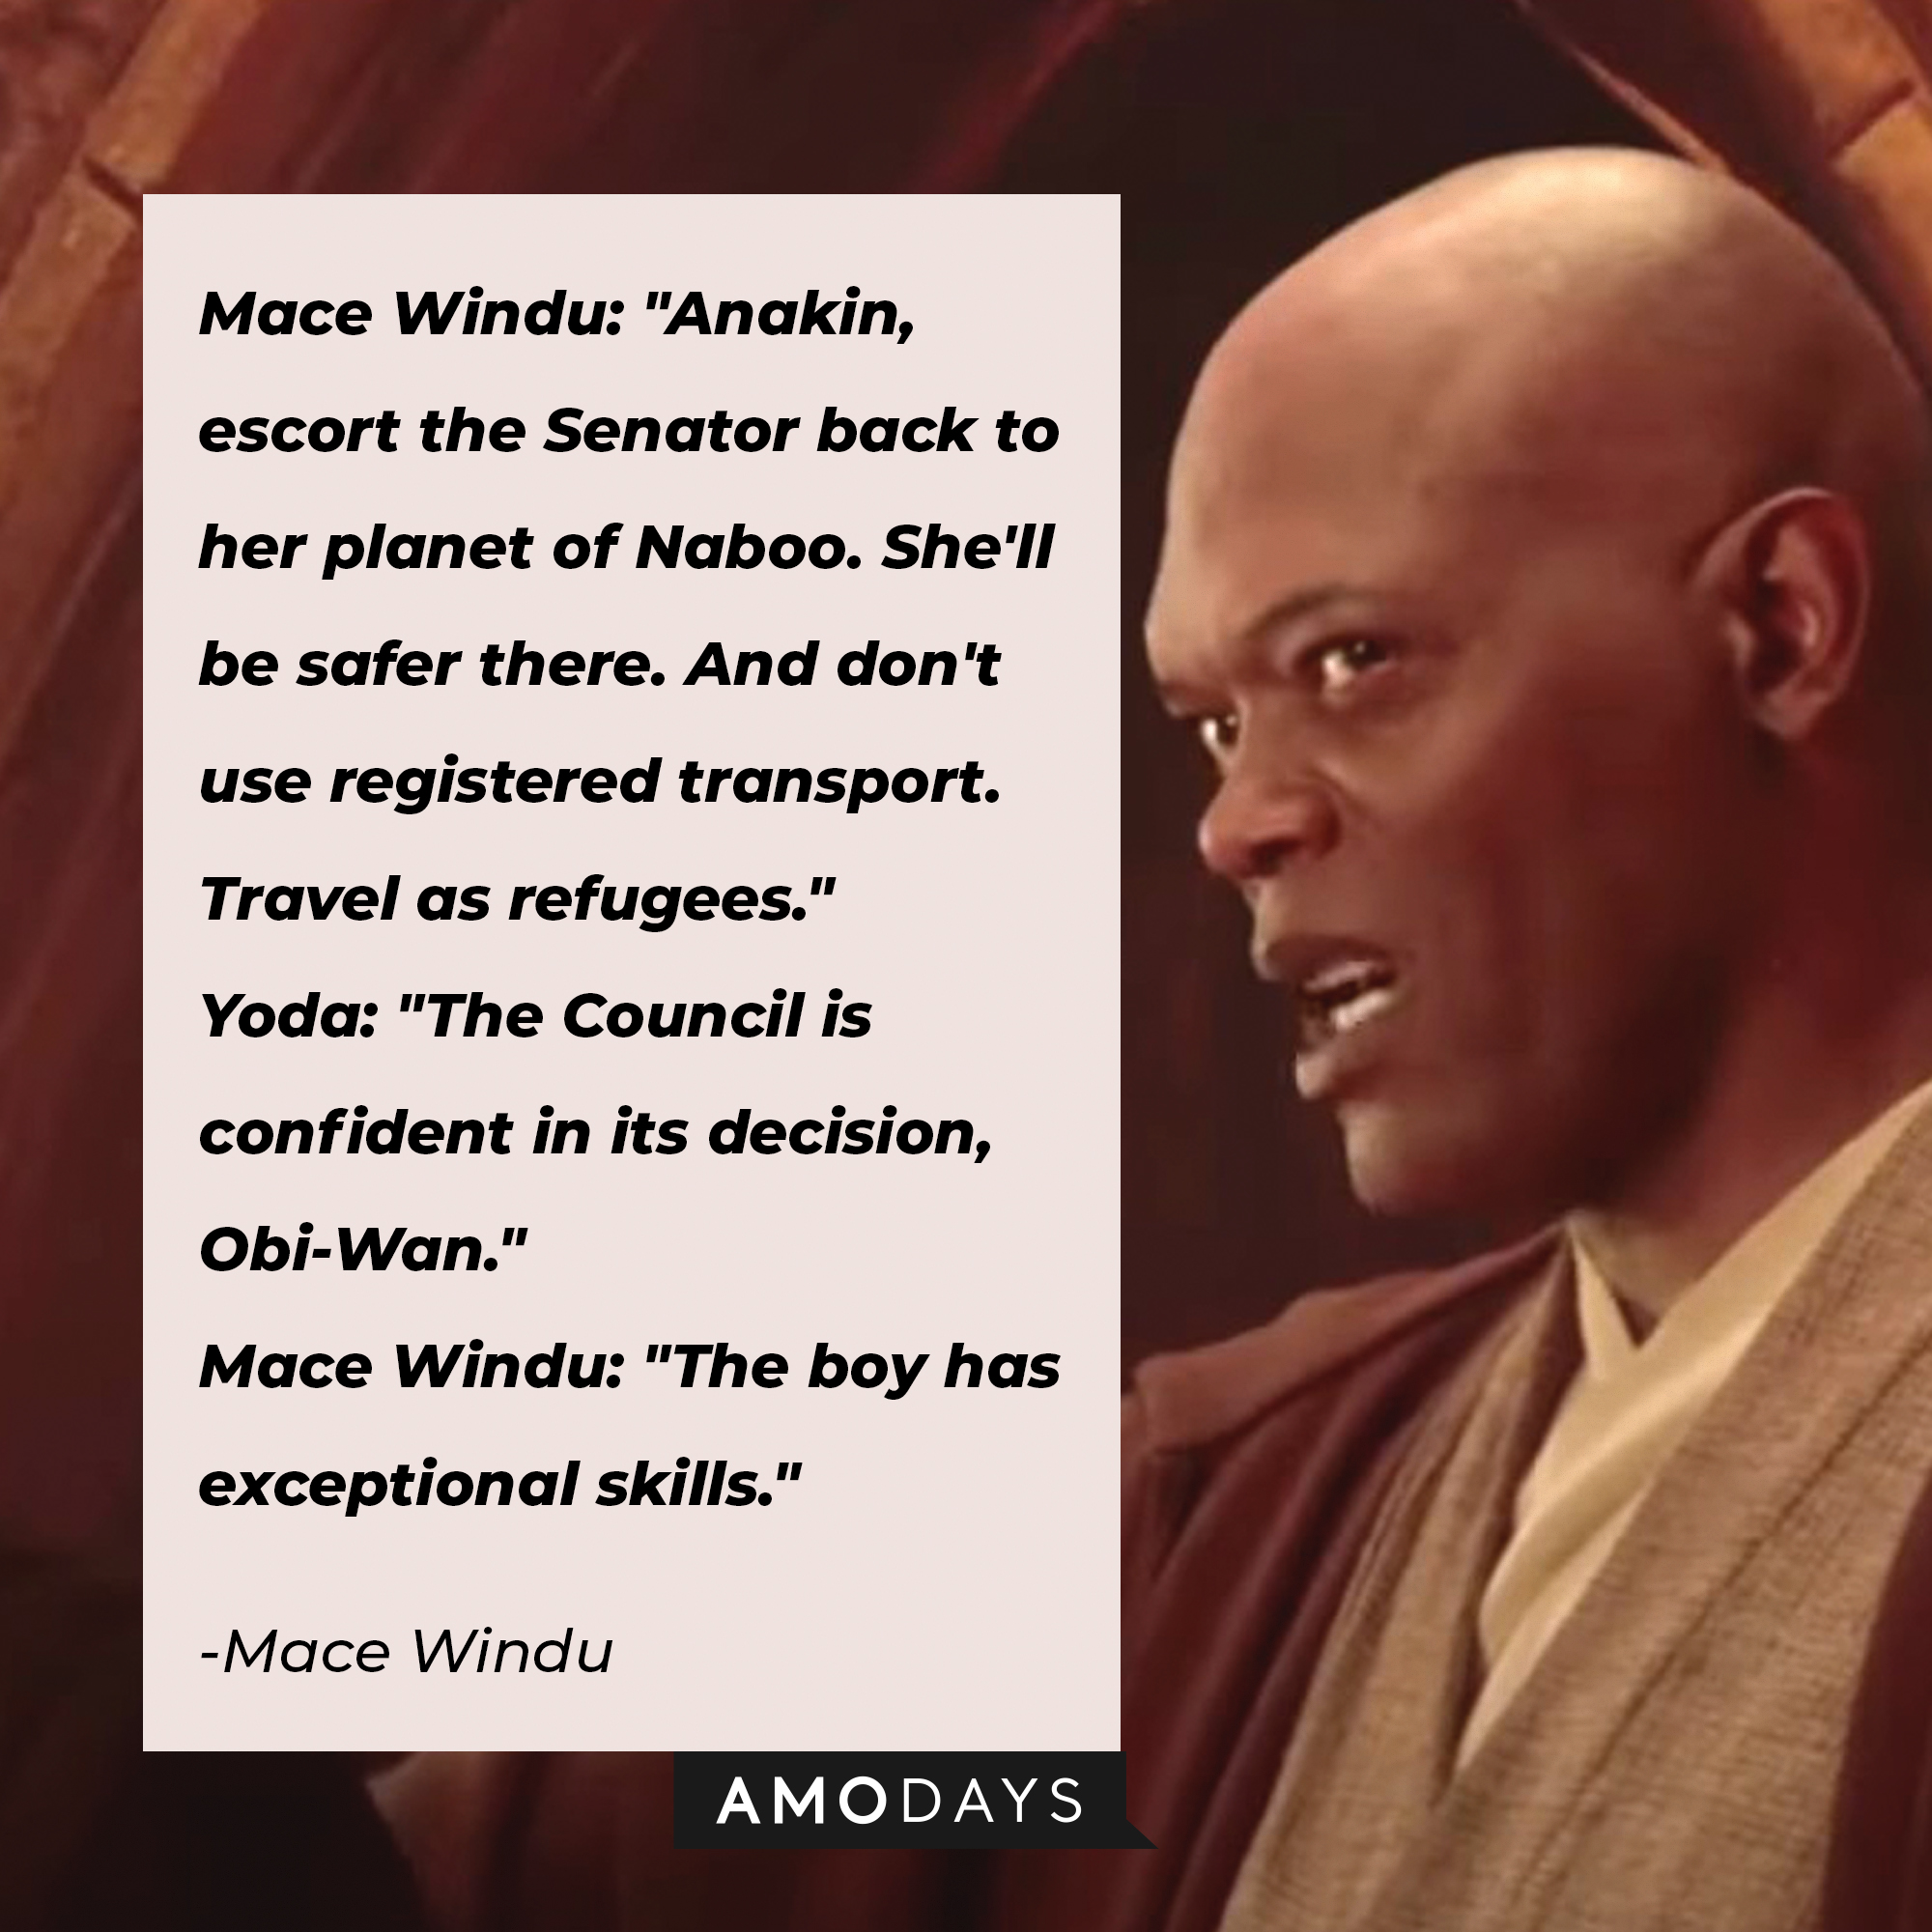 Mace Windu's quote: "Anakin, escort the Senator back to her planet of Naboo. She'll be safer there. And don't use registered transport. Travel as refugees." ; Yoda: "The Council is confident in its decision, Obi-Wan." ; Mace Windu: "The boy has exceptional skills." | Image: Facebook / StarWars.UK